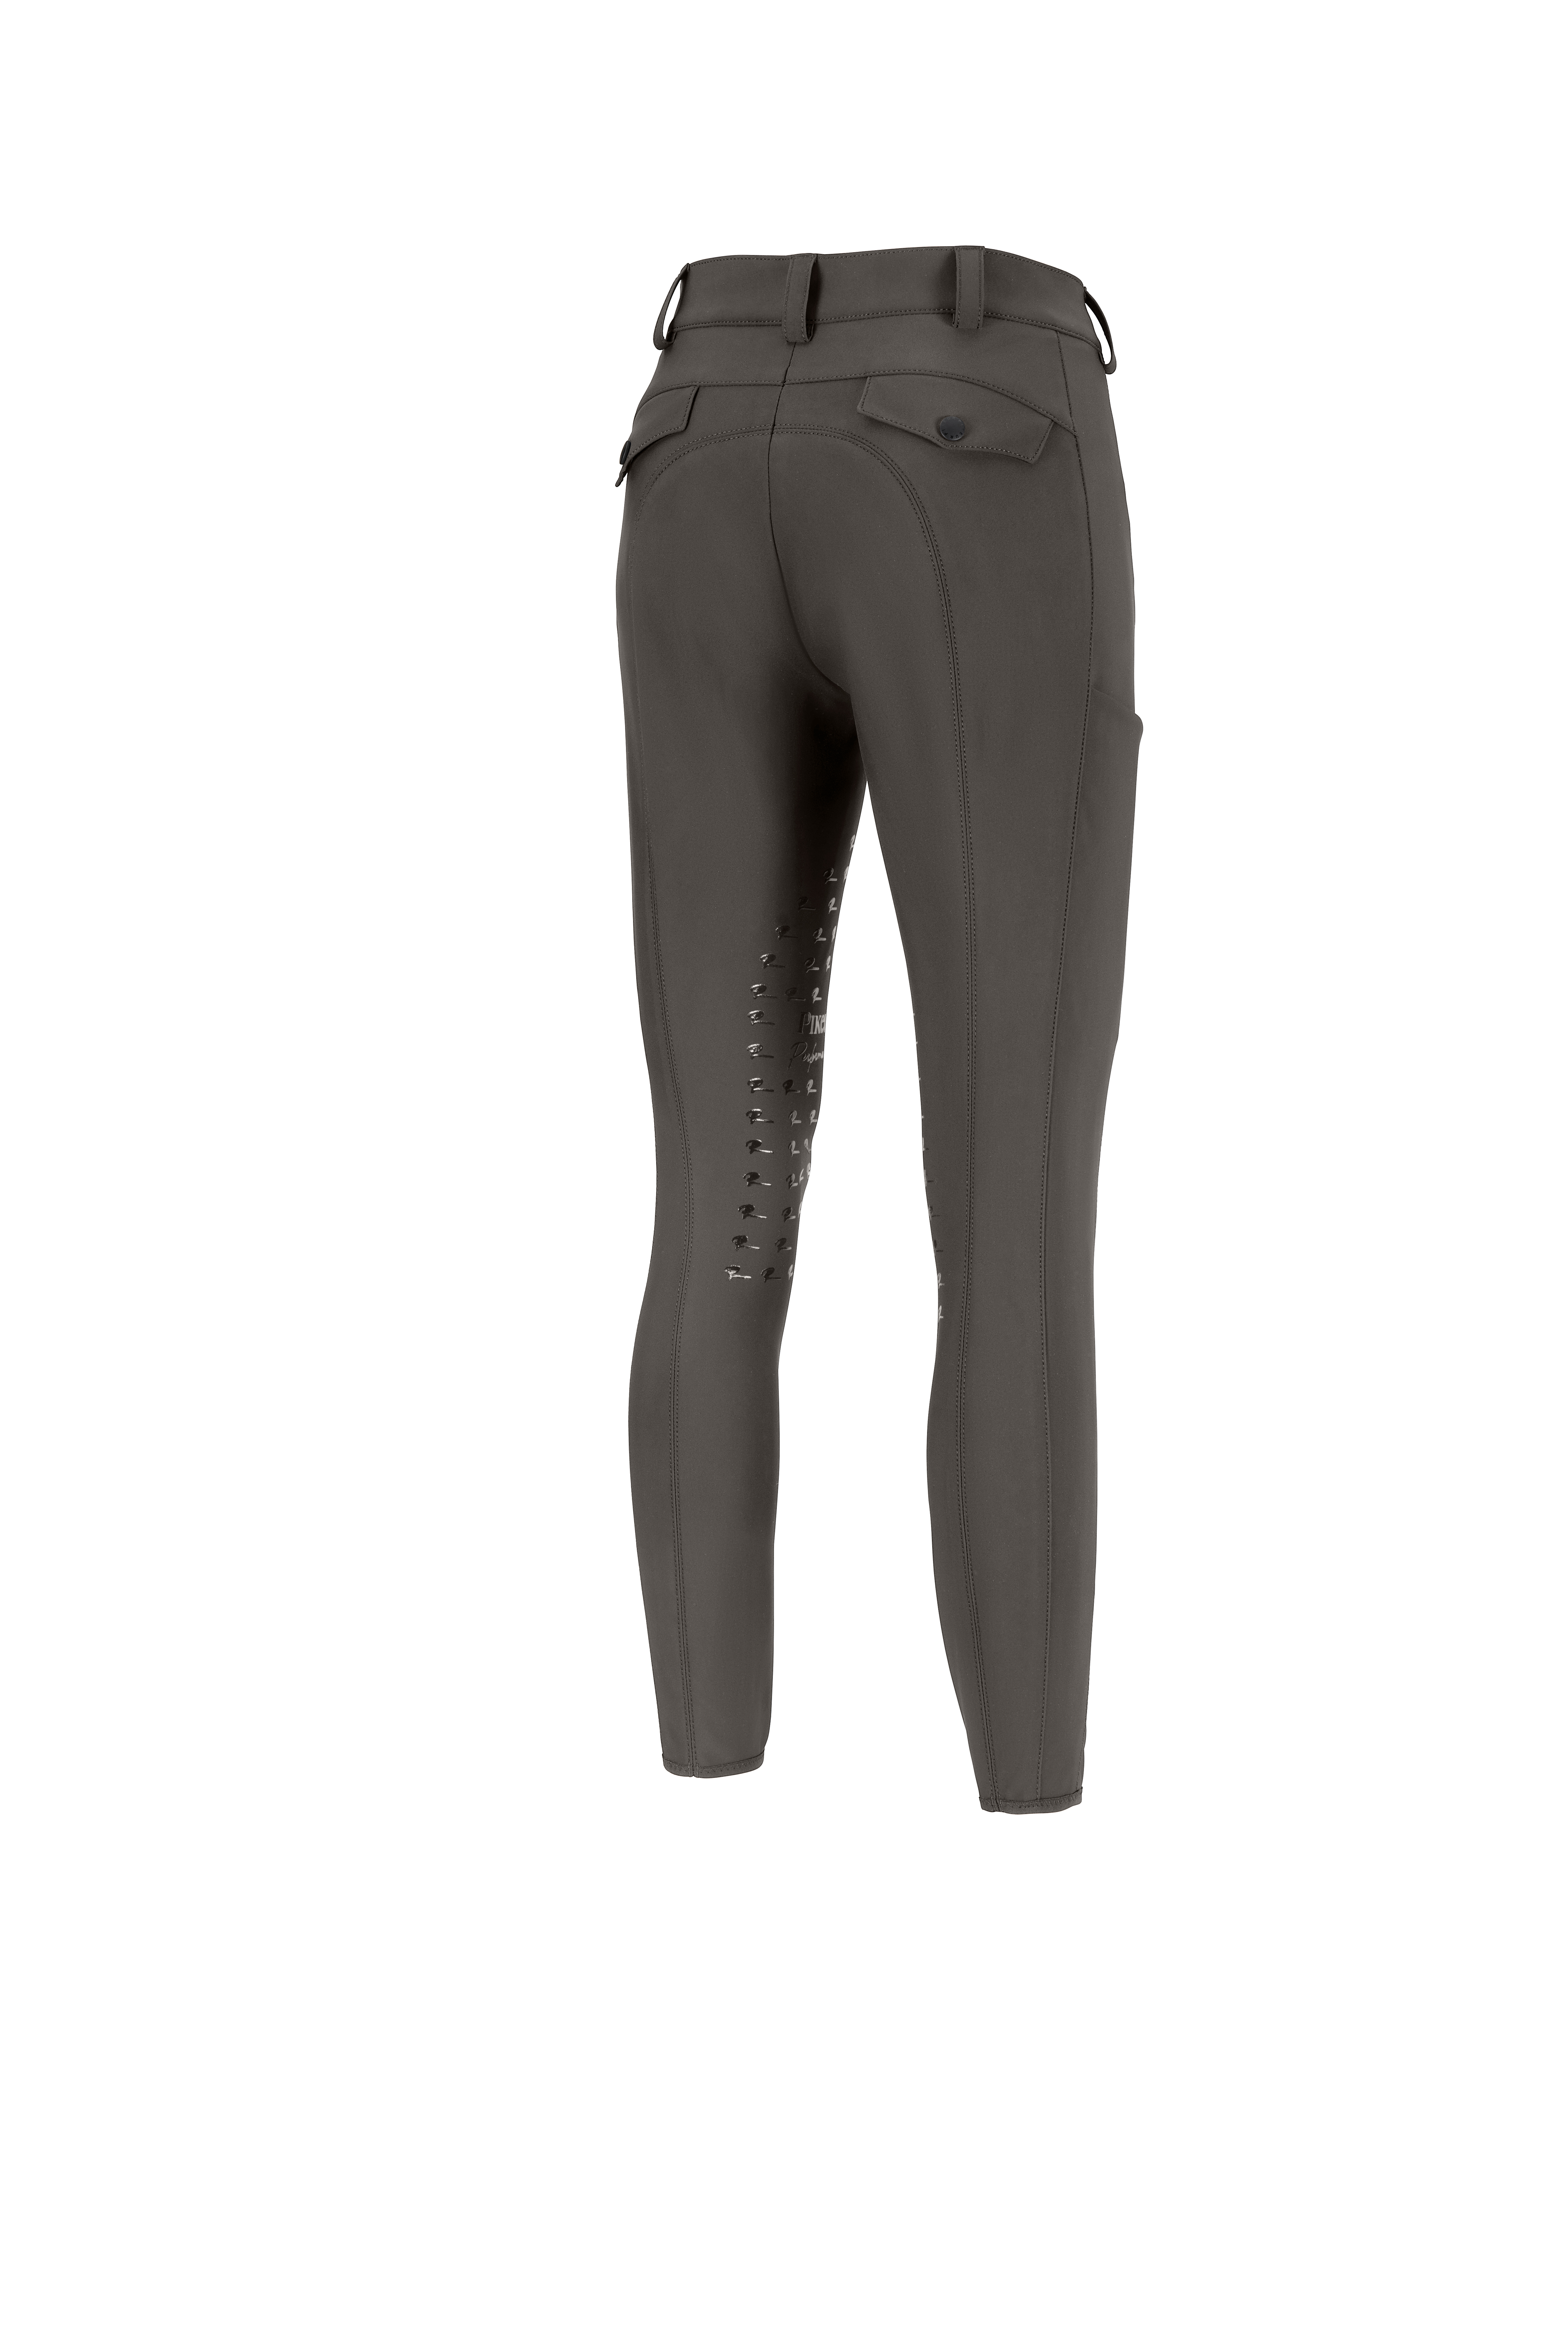 ROMY riding breeches, grip, knee patches, ladies, H/W 22, blackolive